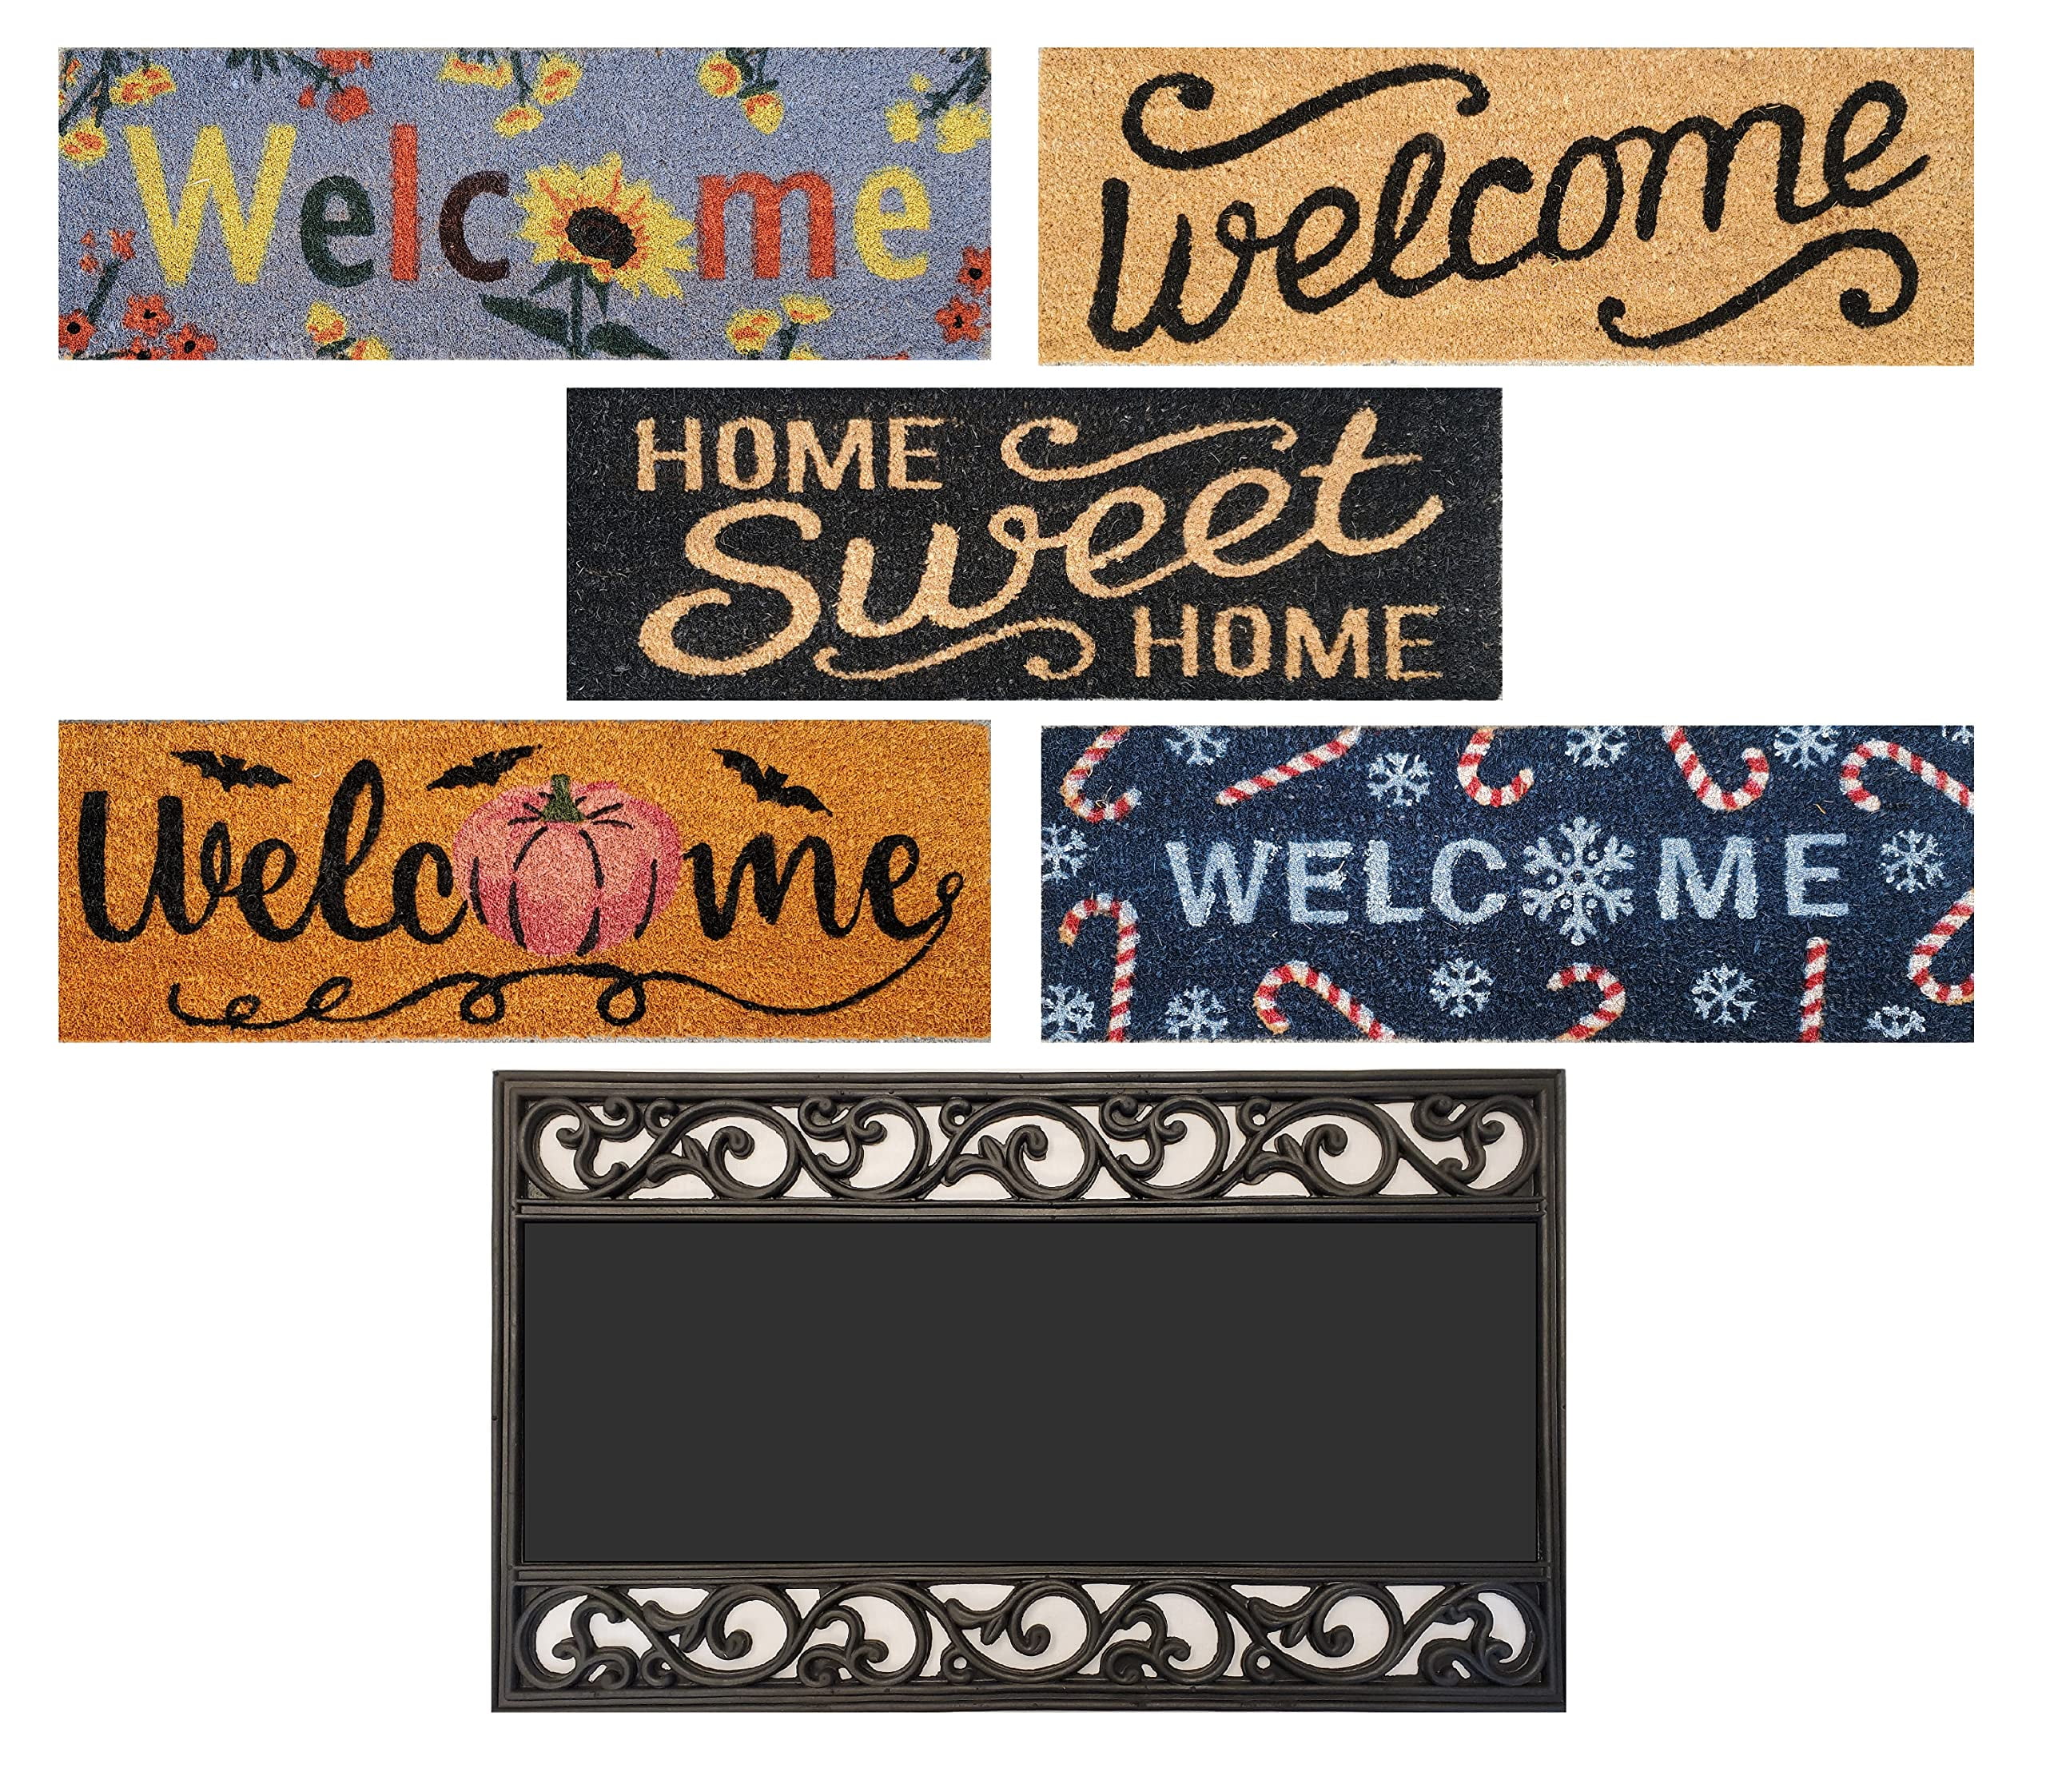 “WELCOME” HEAVY COIR DOORMAT WITH ACORNS & FALL LEAVES BY PARK DESIGNS 